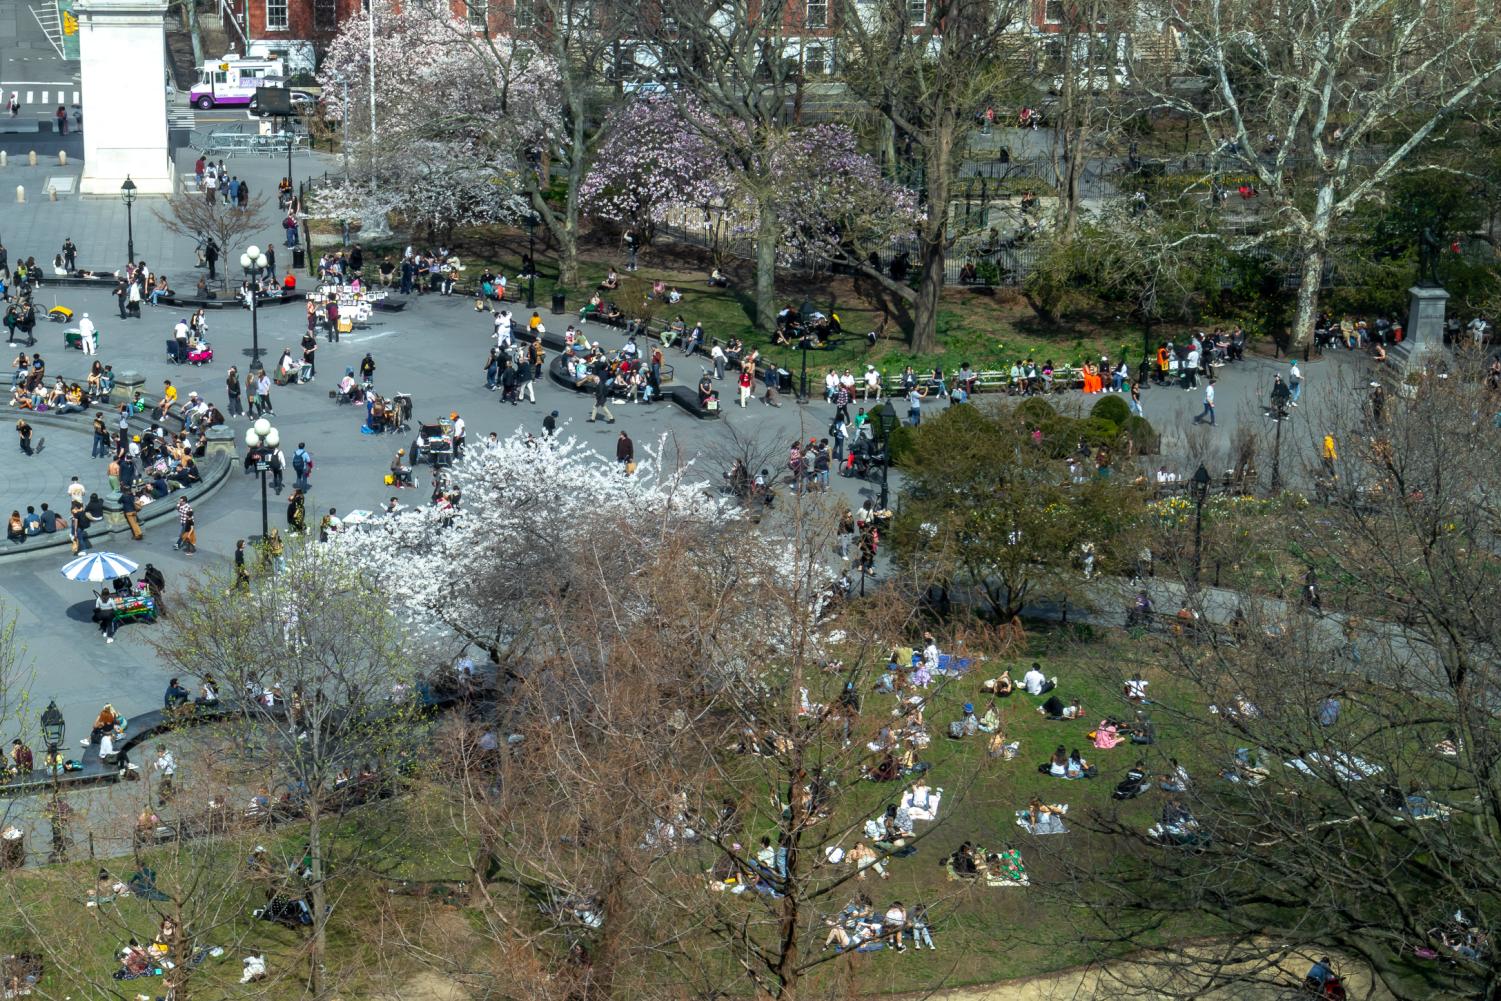 Washington Square Park with people walking and lying on grass.